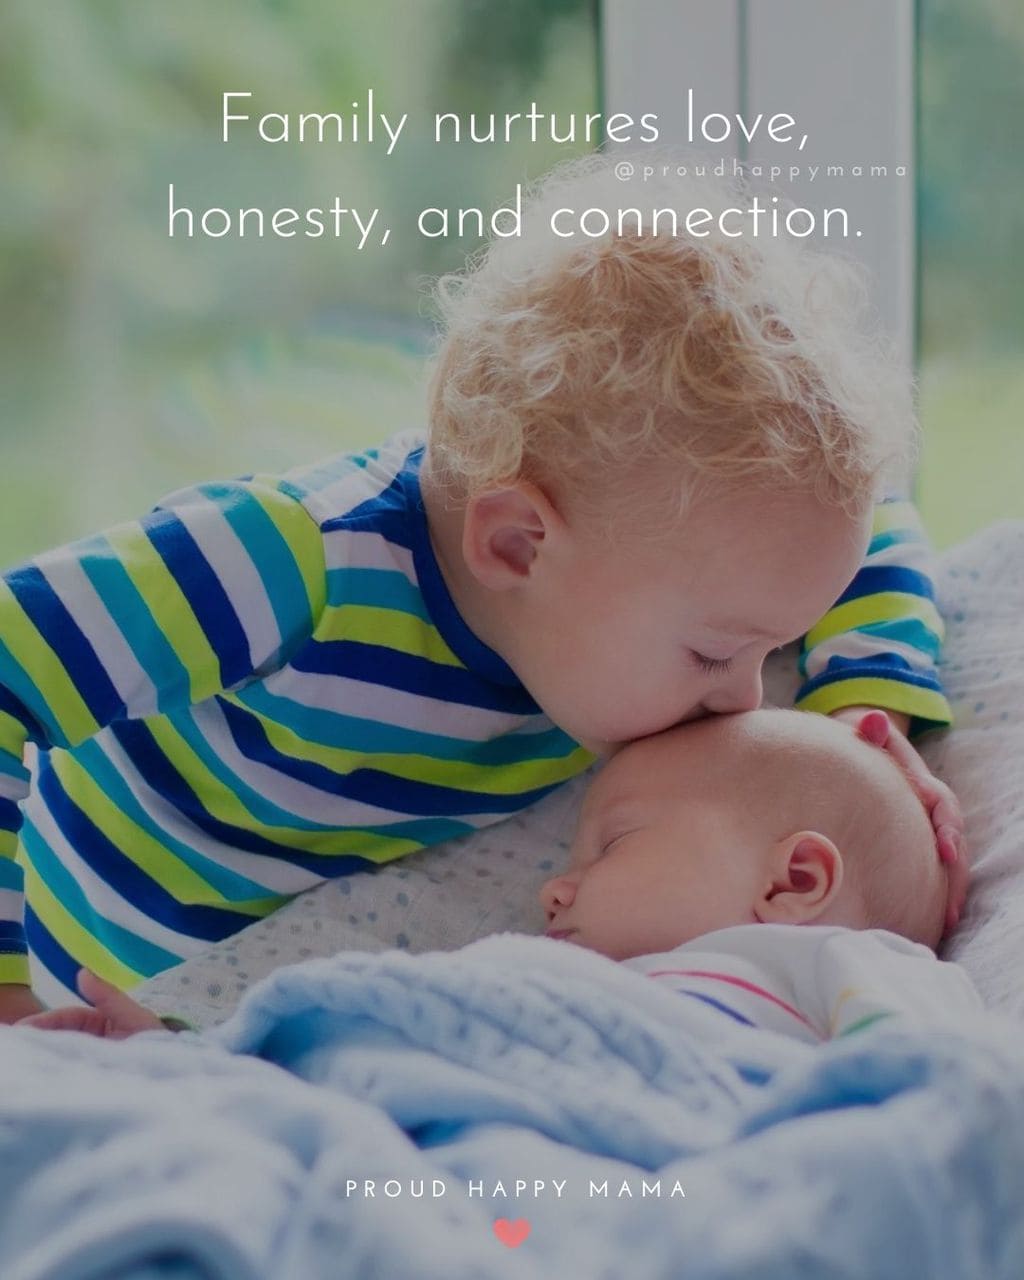 Love Of The Family Quotes | Family nurtures love, honesty, and connection.